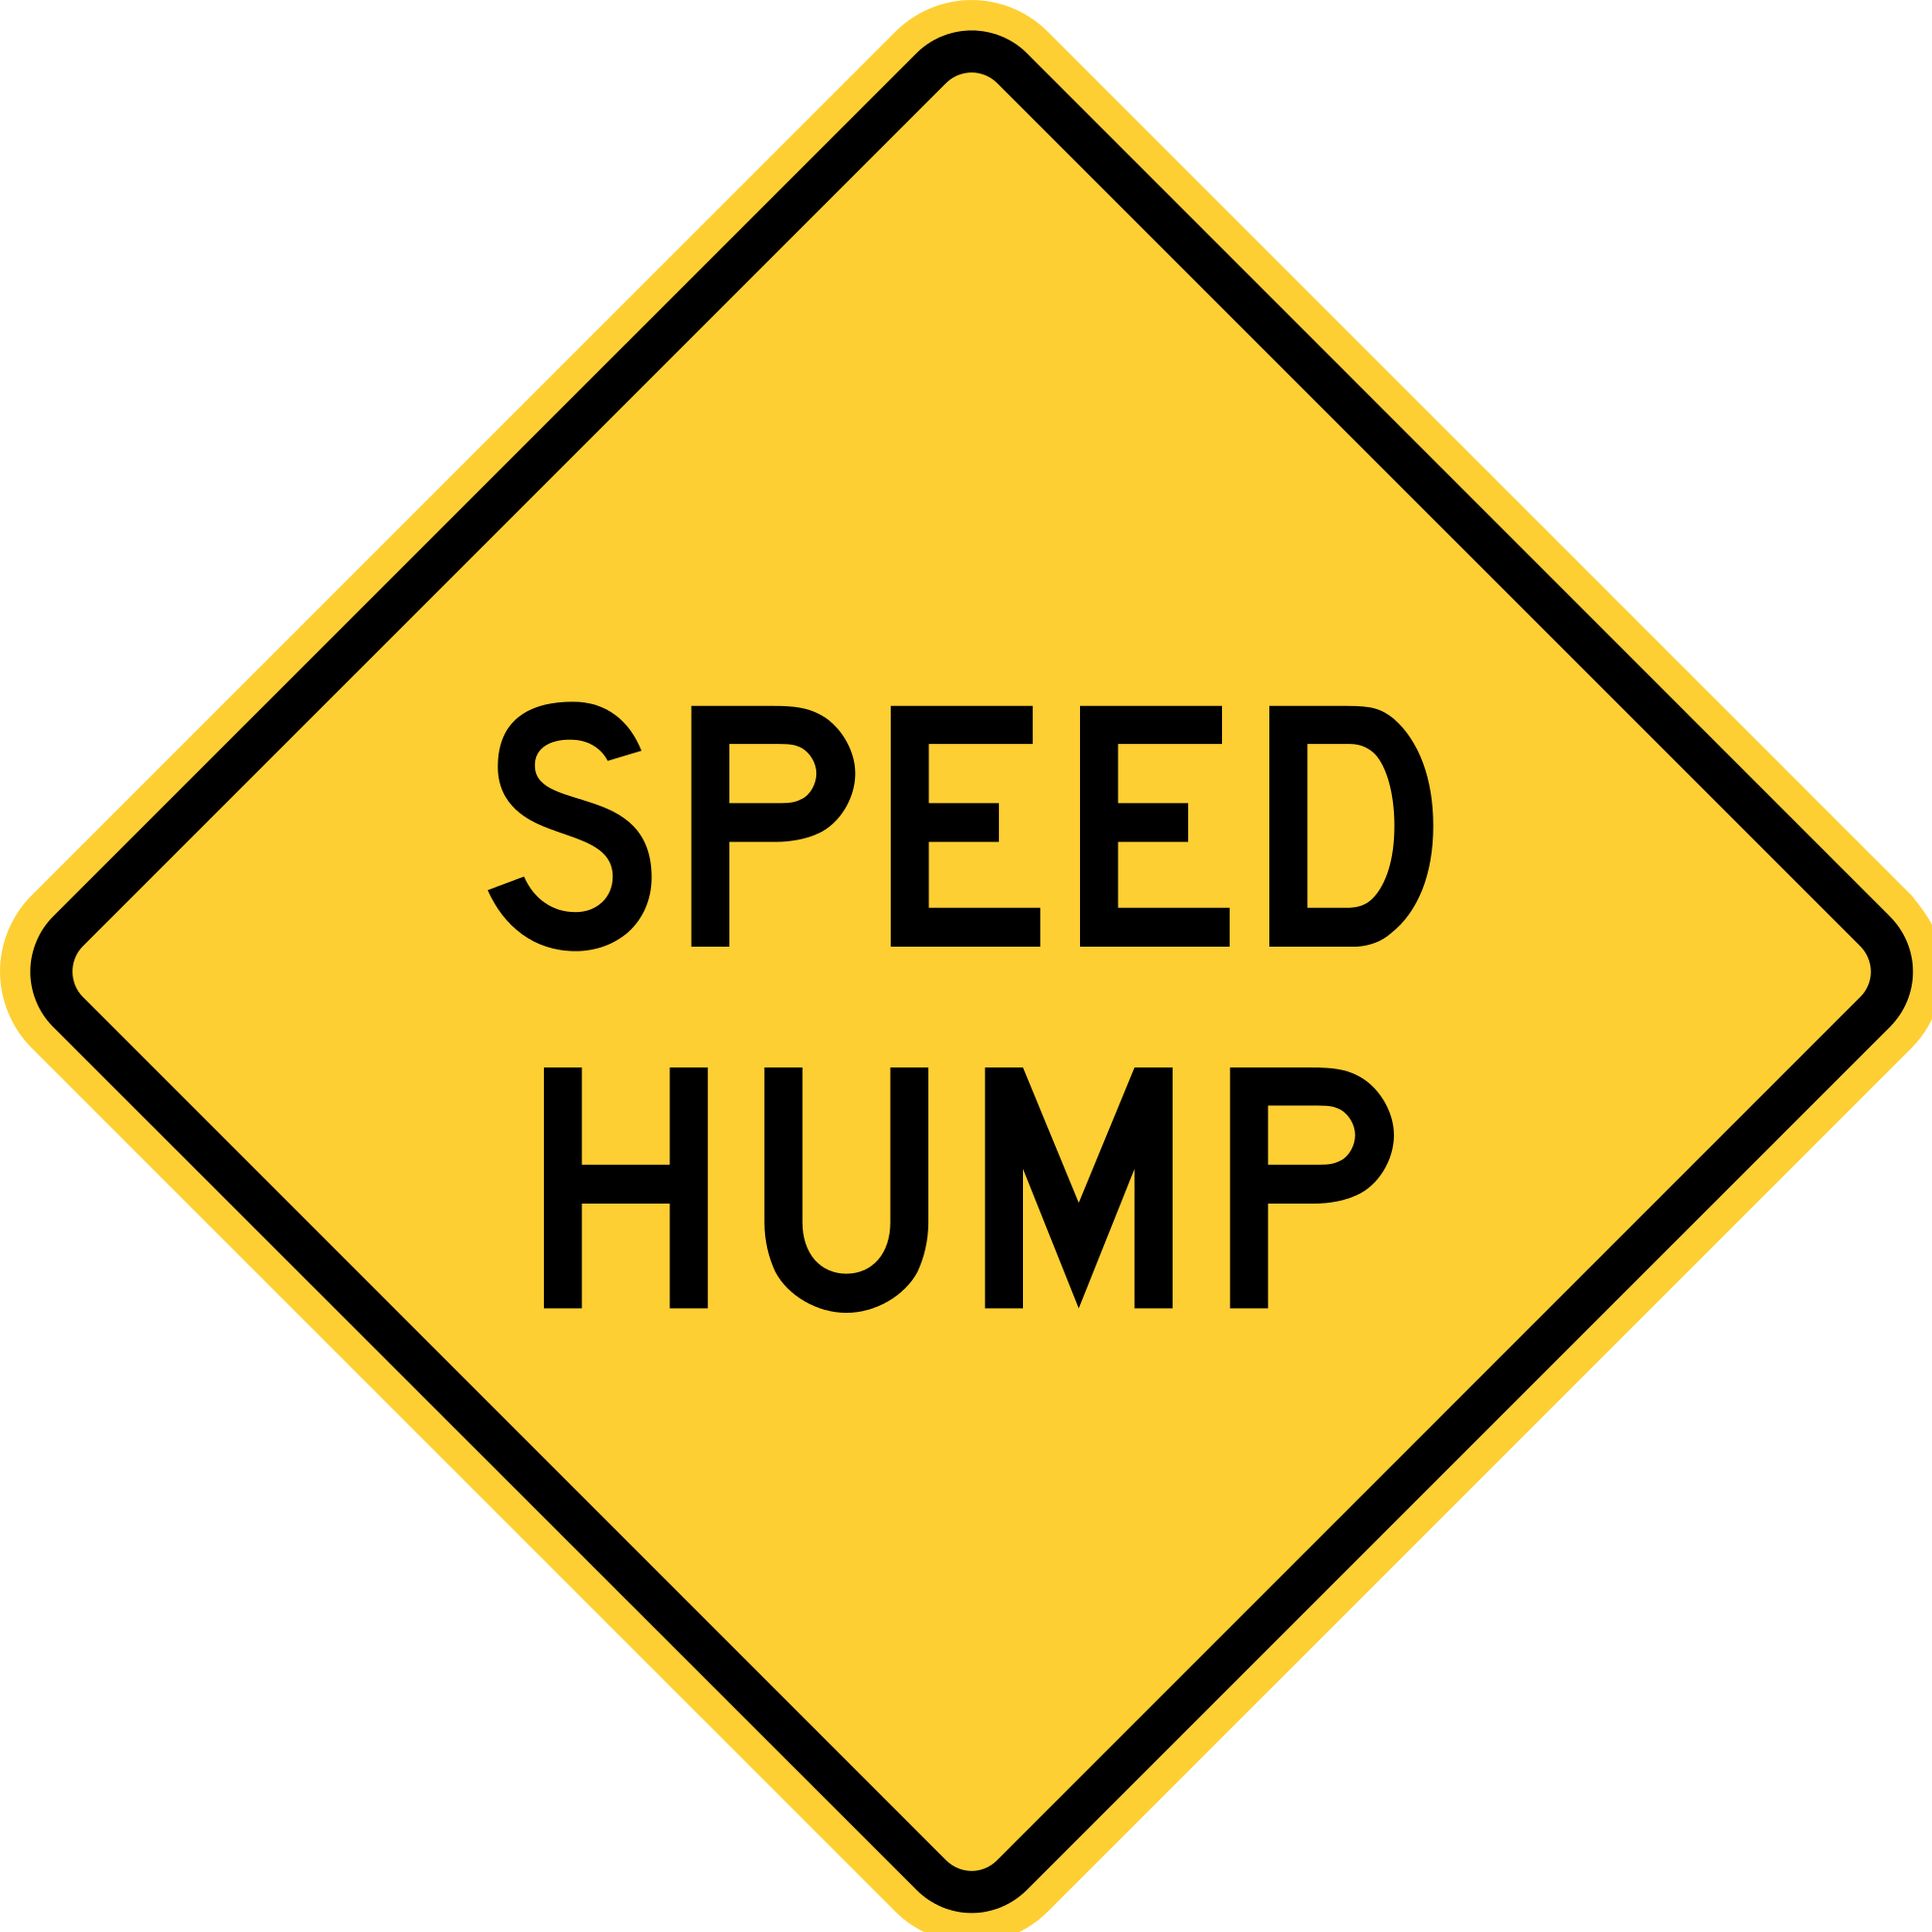 Speed humping